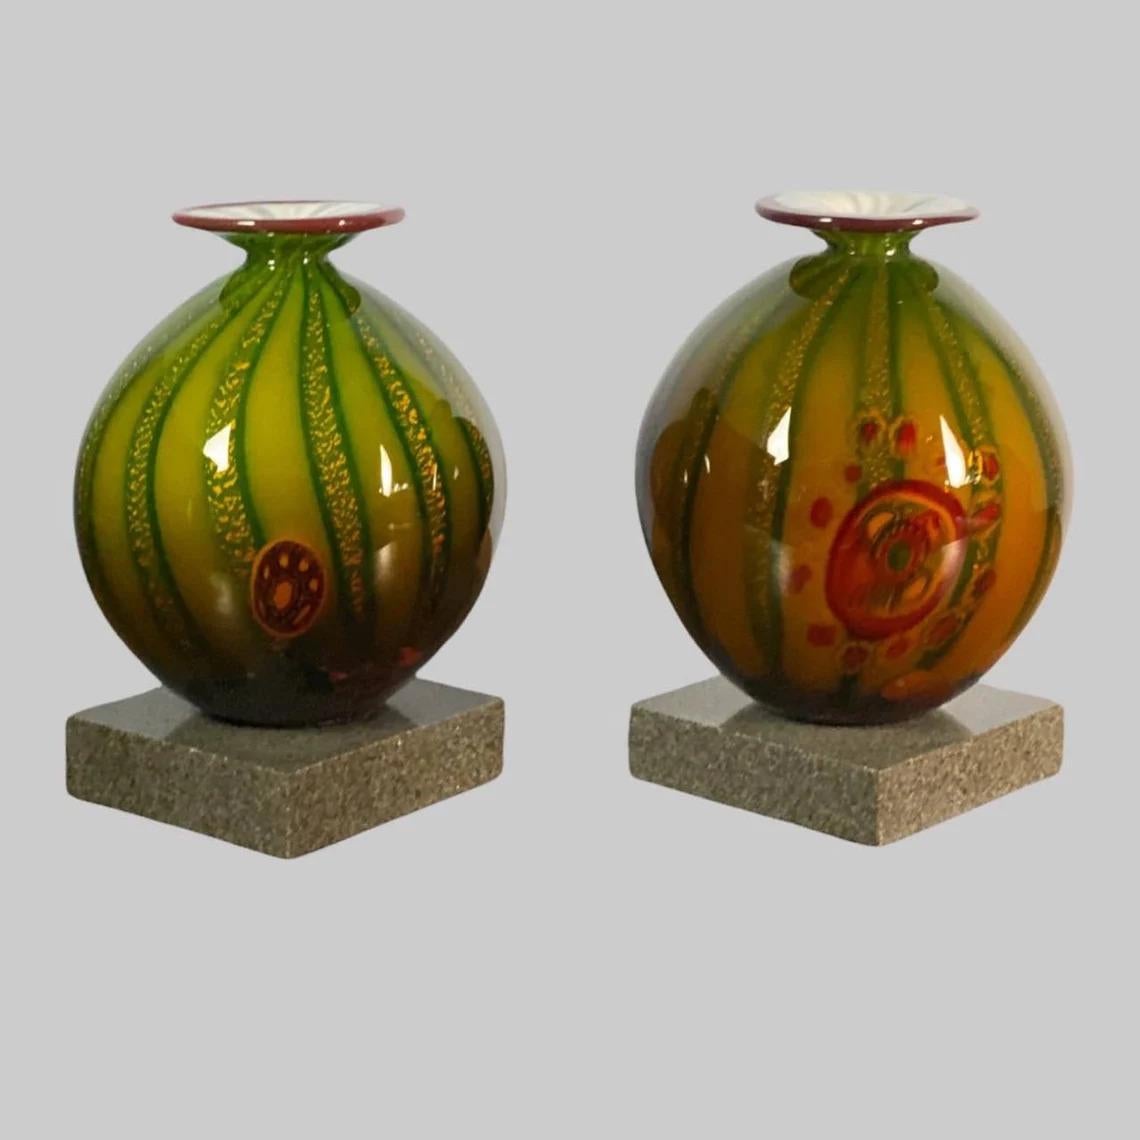 Luxurious rare old paired Murano glass vases on original stand made of marble.

Murano Glass made according to ancient technologies that arose on the island of Murano, near Venice. Italy, 20th century.

A rare author's work.

Extraordinarily